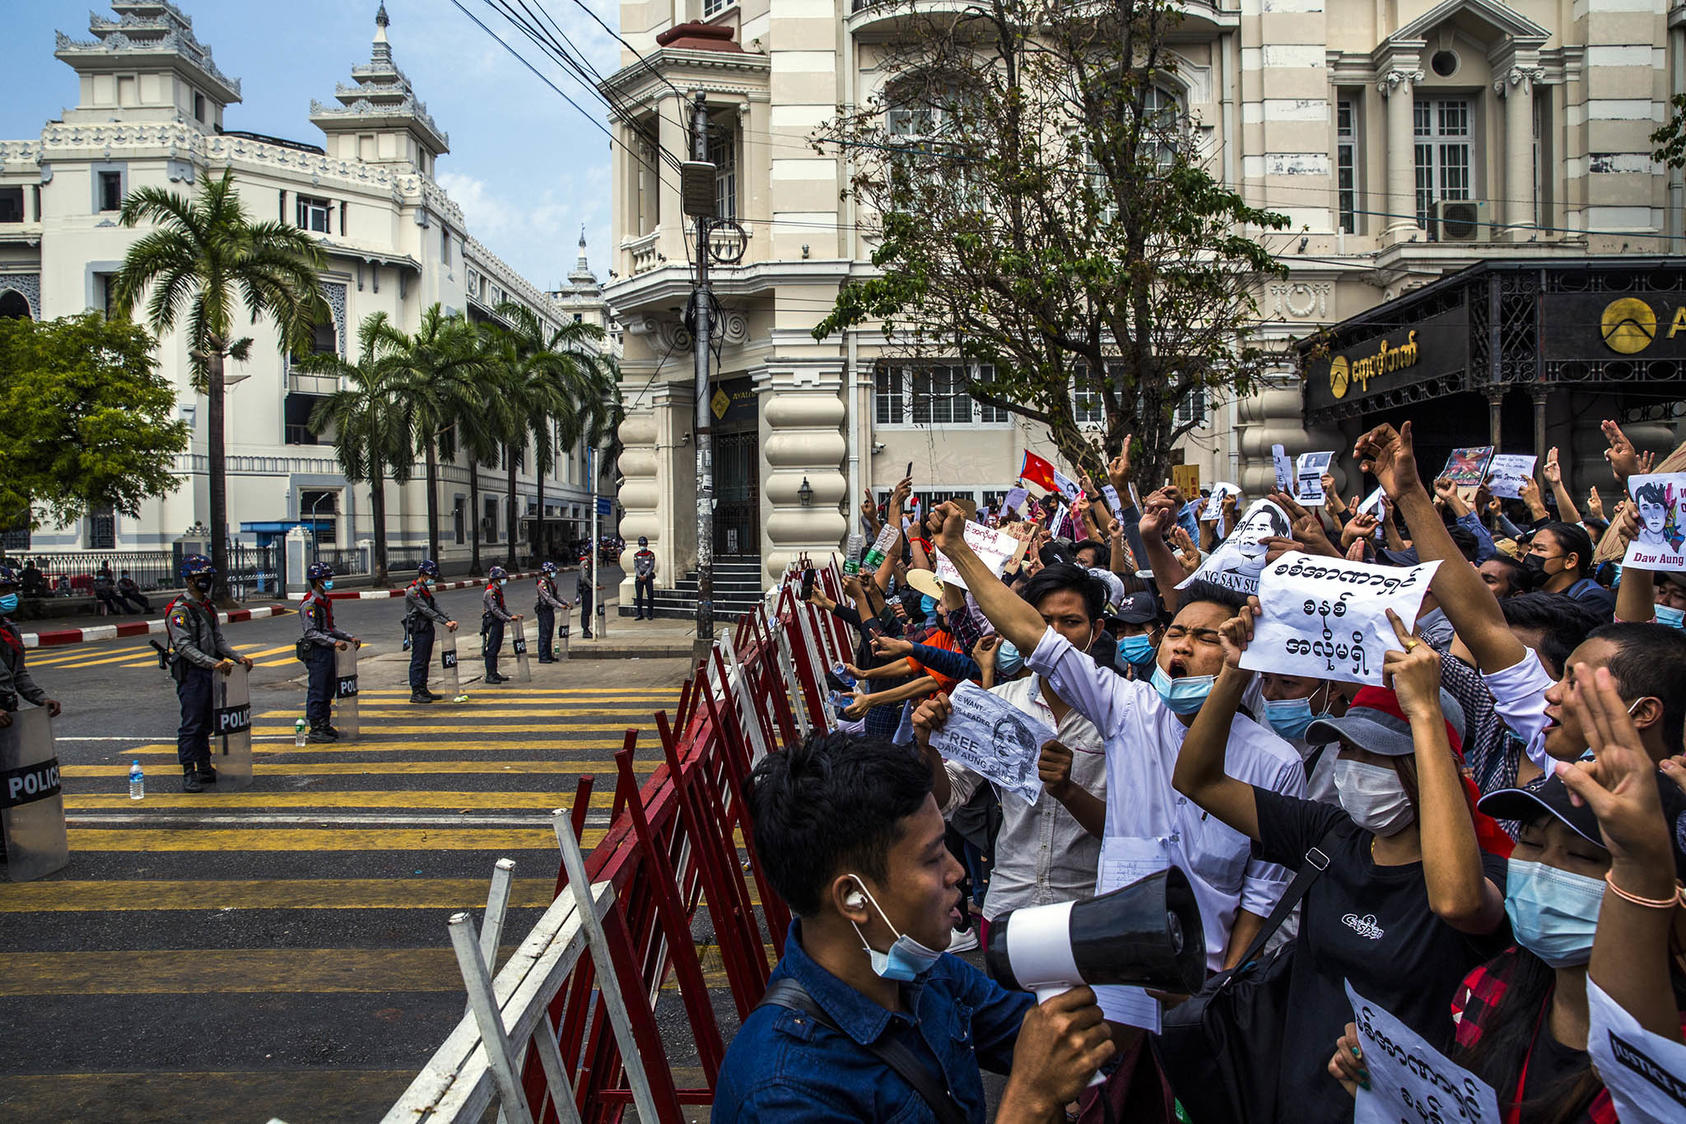 Protesters demonstrate after the military took power in a coup, Yangon, Myanmar, Feb. 8, 2021. The regime announced Monday that it had executed four pro-democracy activists, the first executions in Myanmar in more than three decades. (The New York Times)